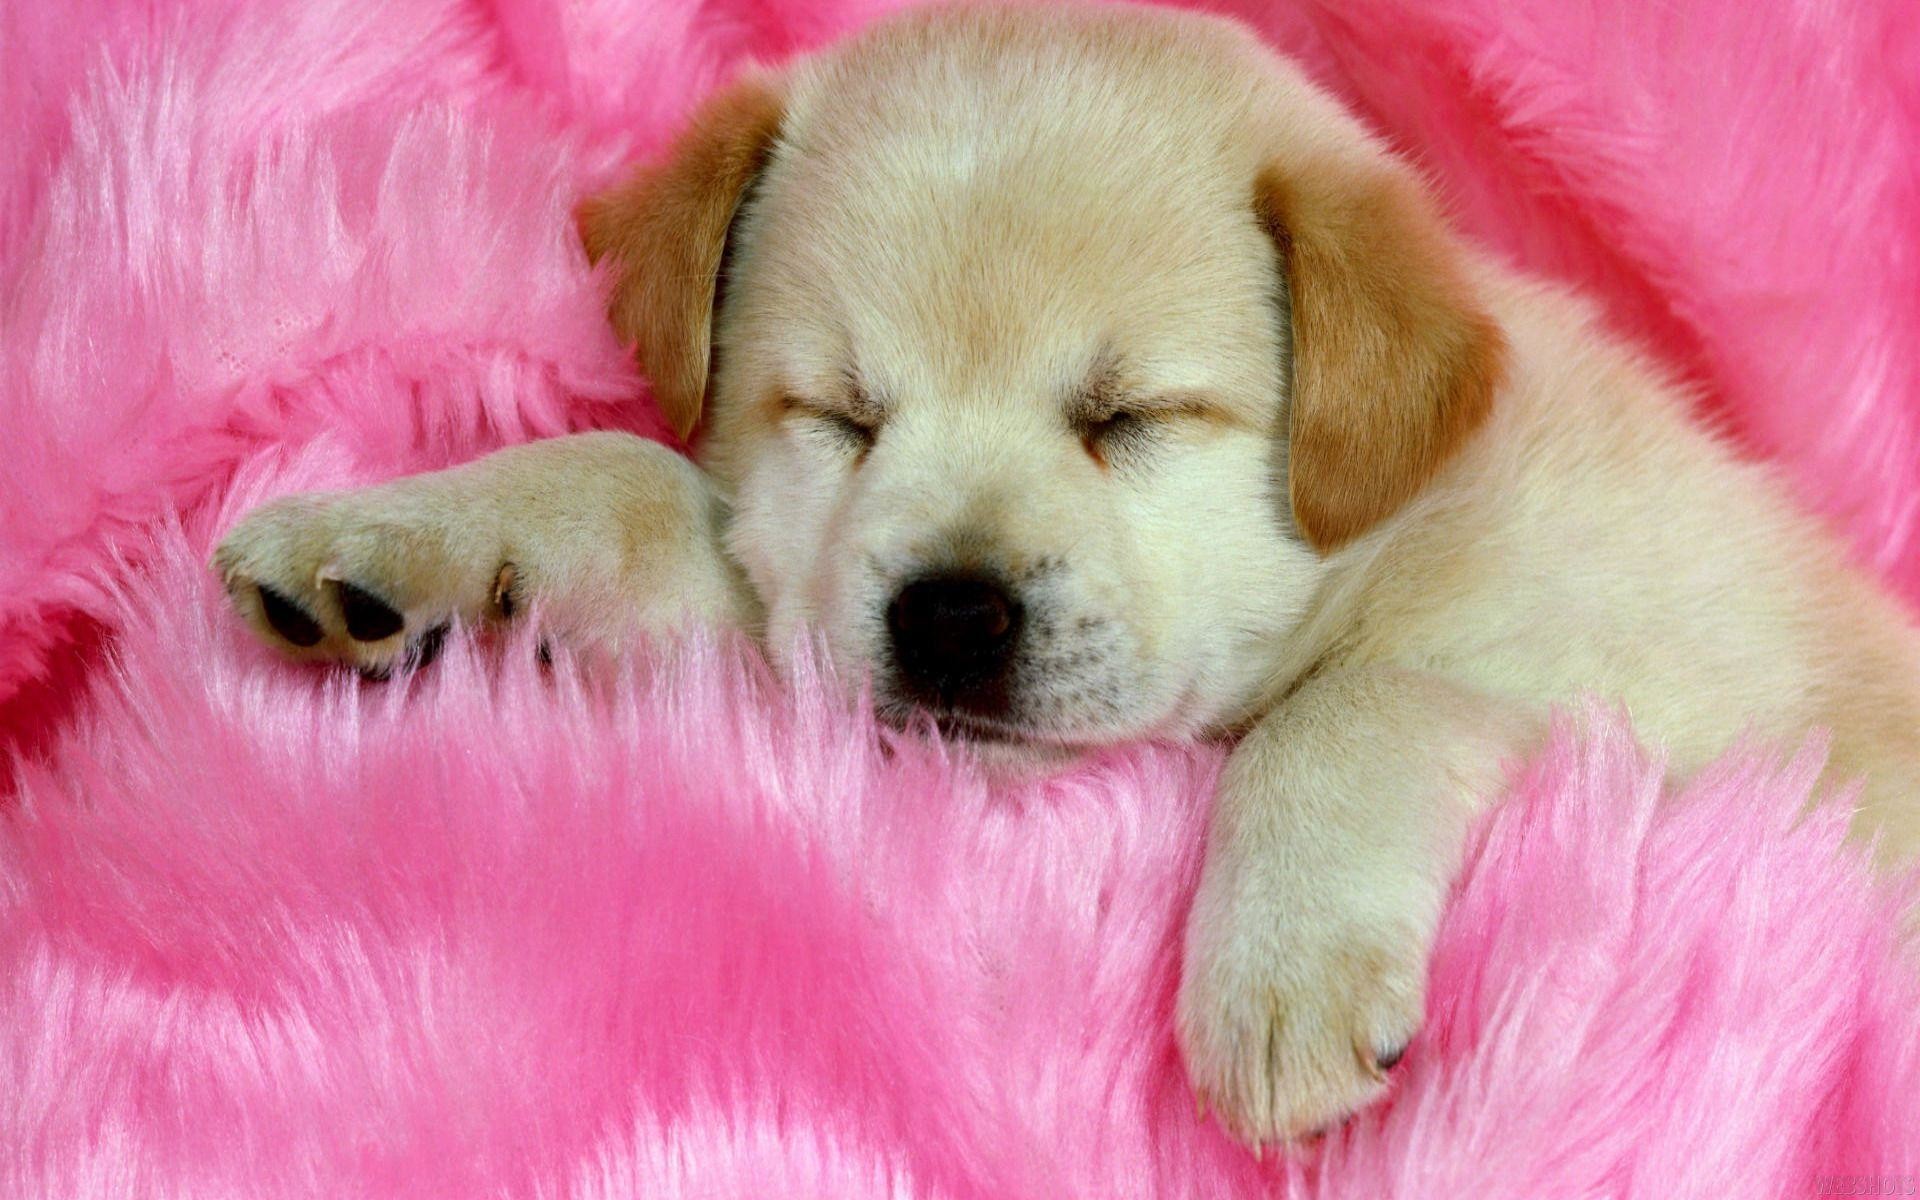 1920x1200 Cute Dogs Wallpapers - Animal Wallpapers (1959) ilikewalls.